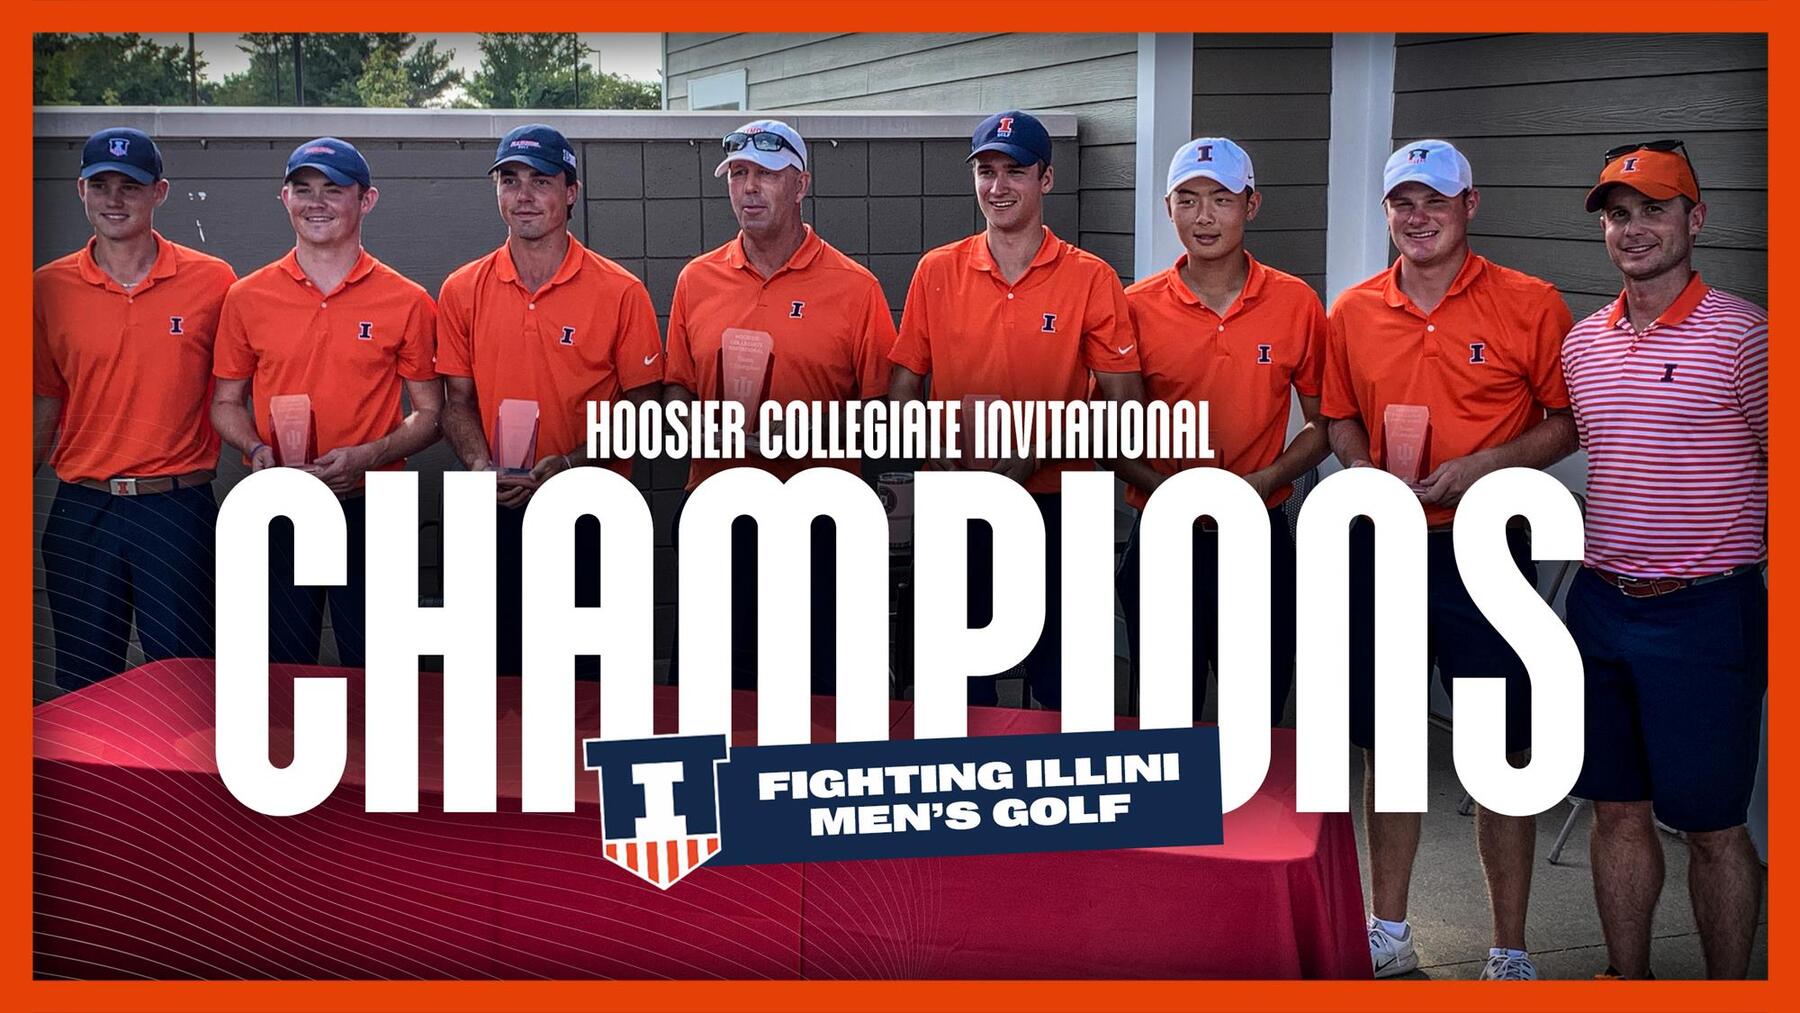 Illini Men's Golf team poses with trophies from the Hoosier Collegiate Invitational tournament